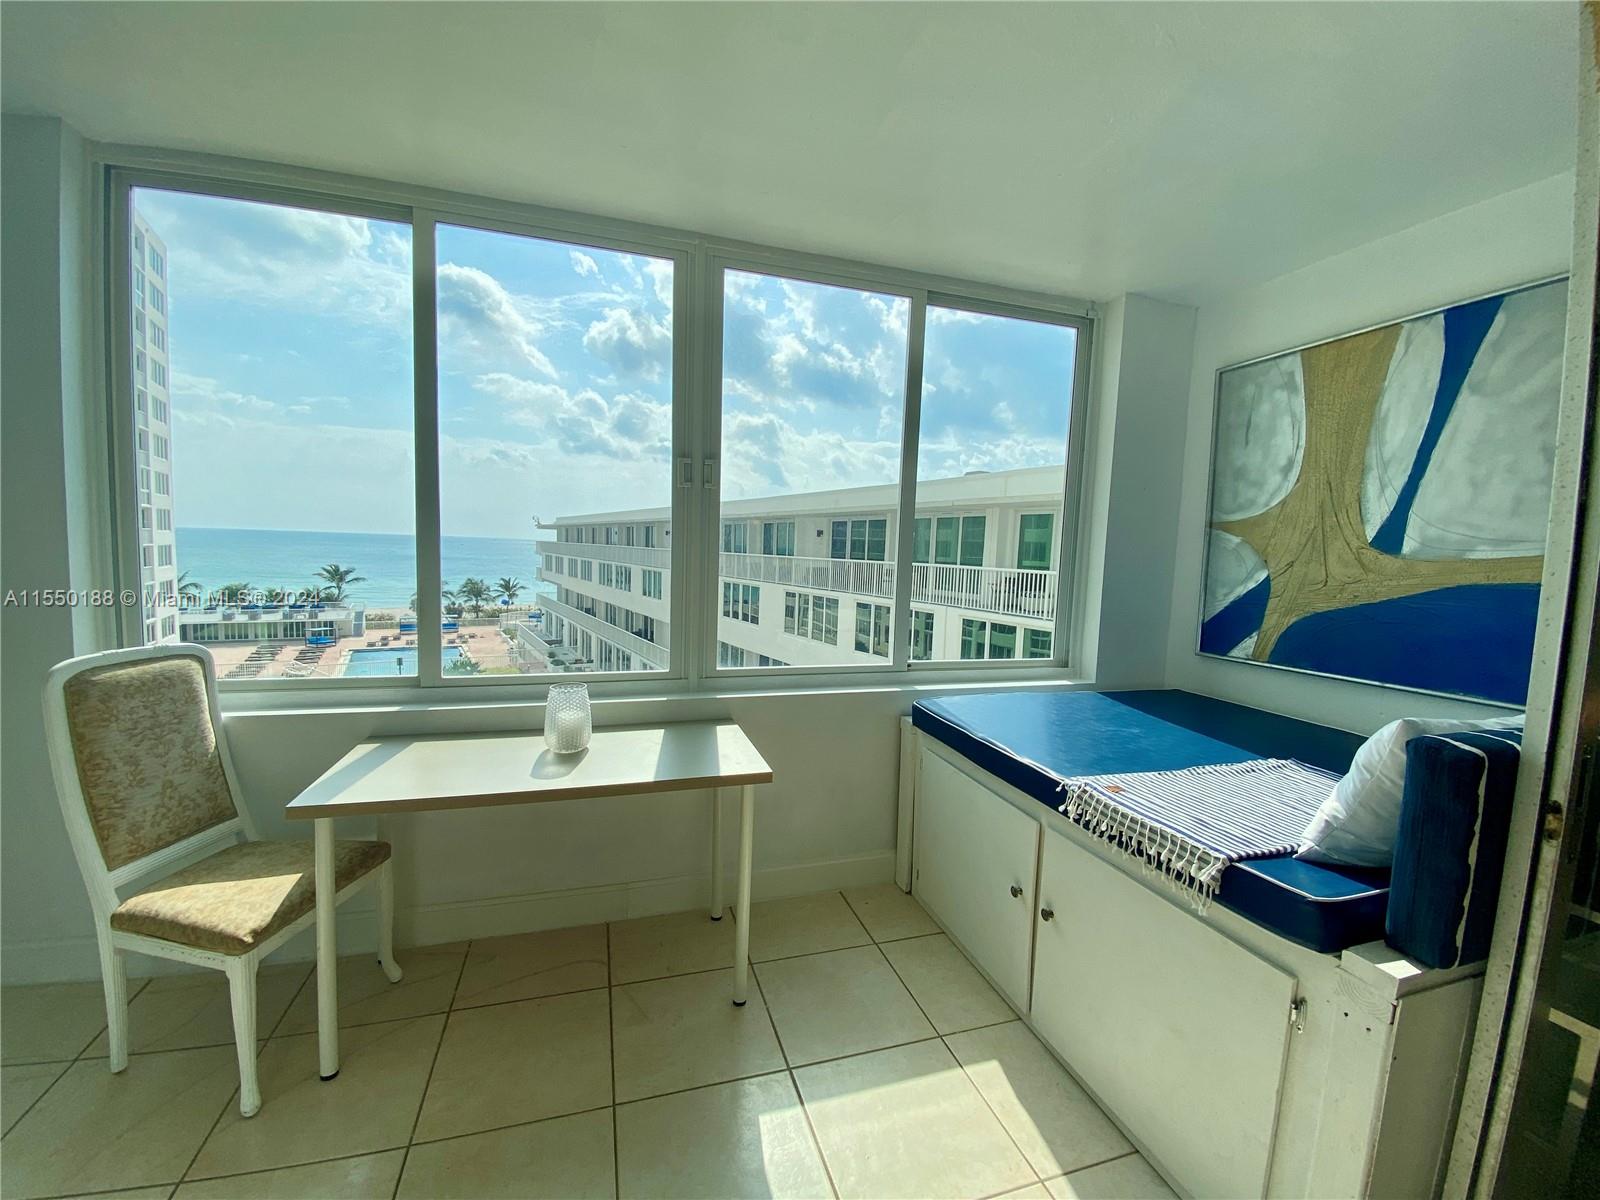 Wake up to stunning ocean view every day, from one of the most sought-after line units at the Carriage House Condo. Located just minutes from all the action of South Beach, but tucked away in a quiet building, you will find that this spacious one bedroom plus den with floor-to-ceiling windows is just what you are looking for. Unit features a large walking closet and enclosed balcony. Can rent furnished or not. Comes with an assigned parking space and valet. Conveniently located just steps away from the elevator that gives access to the beach, amenities and laundry room. On site gym, pool and sundeck overlooking the beach, sauna, jacuzzi, basketball/racquetball and tennis courts, convenience store, dry cleaners, beauty salon, restaurants and more. Make this condo your beachfront retreat!